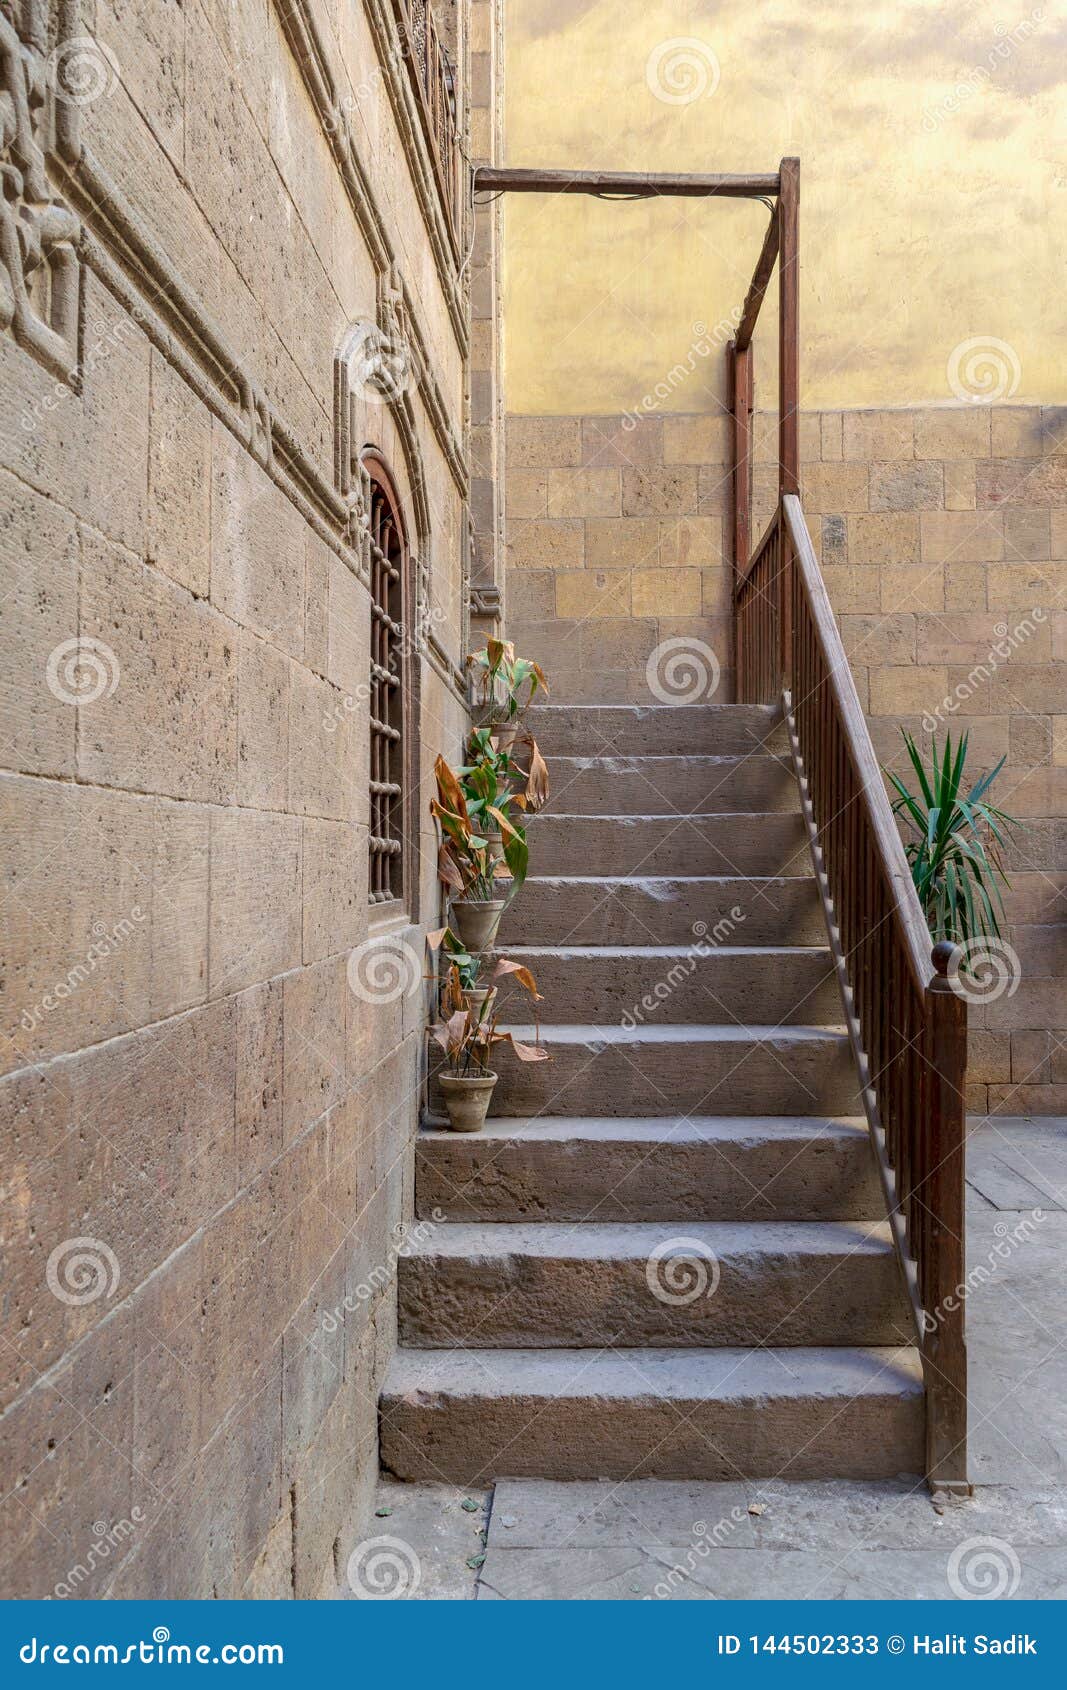 old stone stair case with wooden balustrade, old cairo, egypt